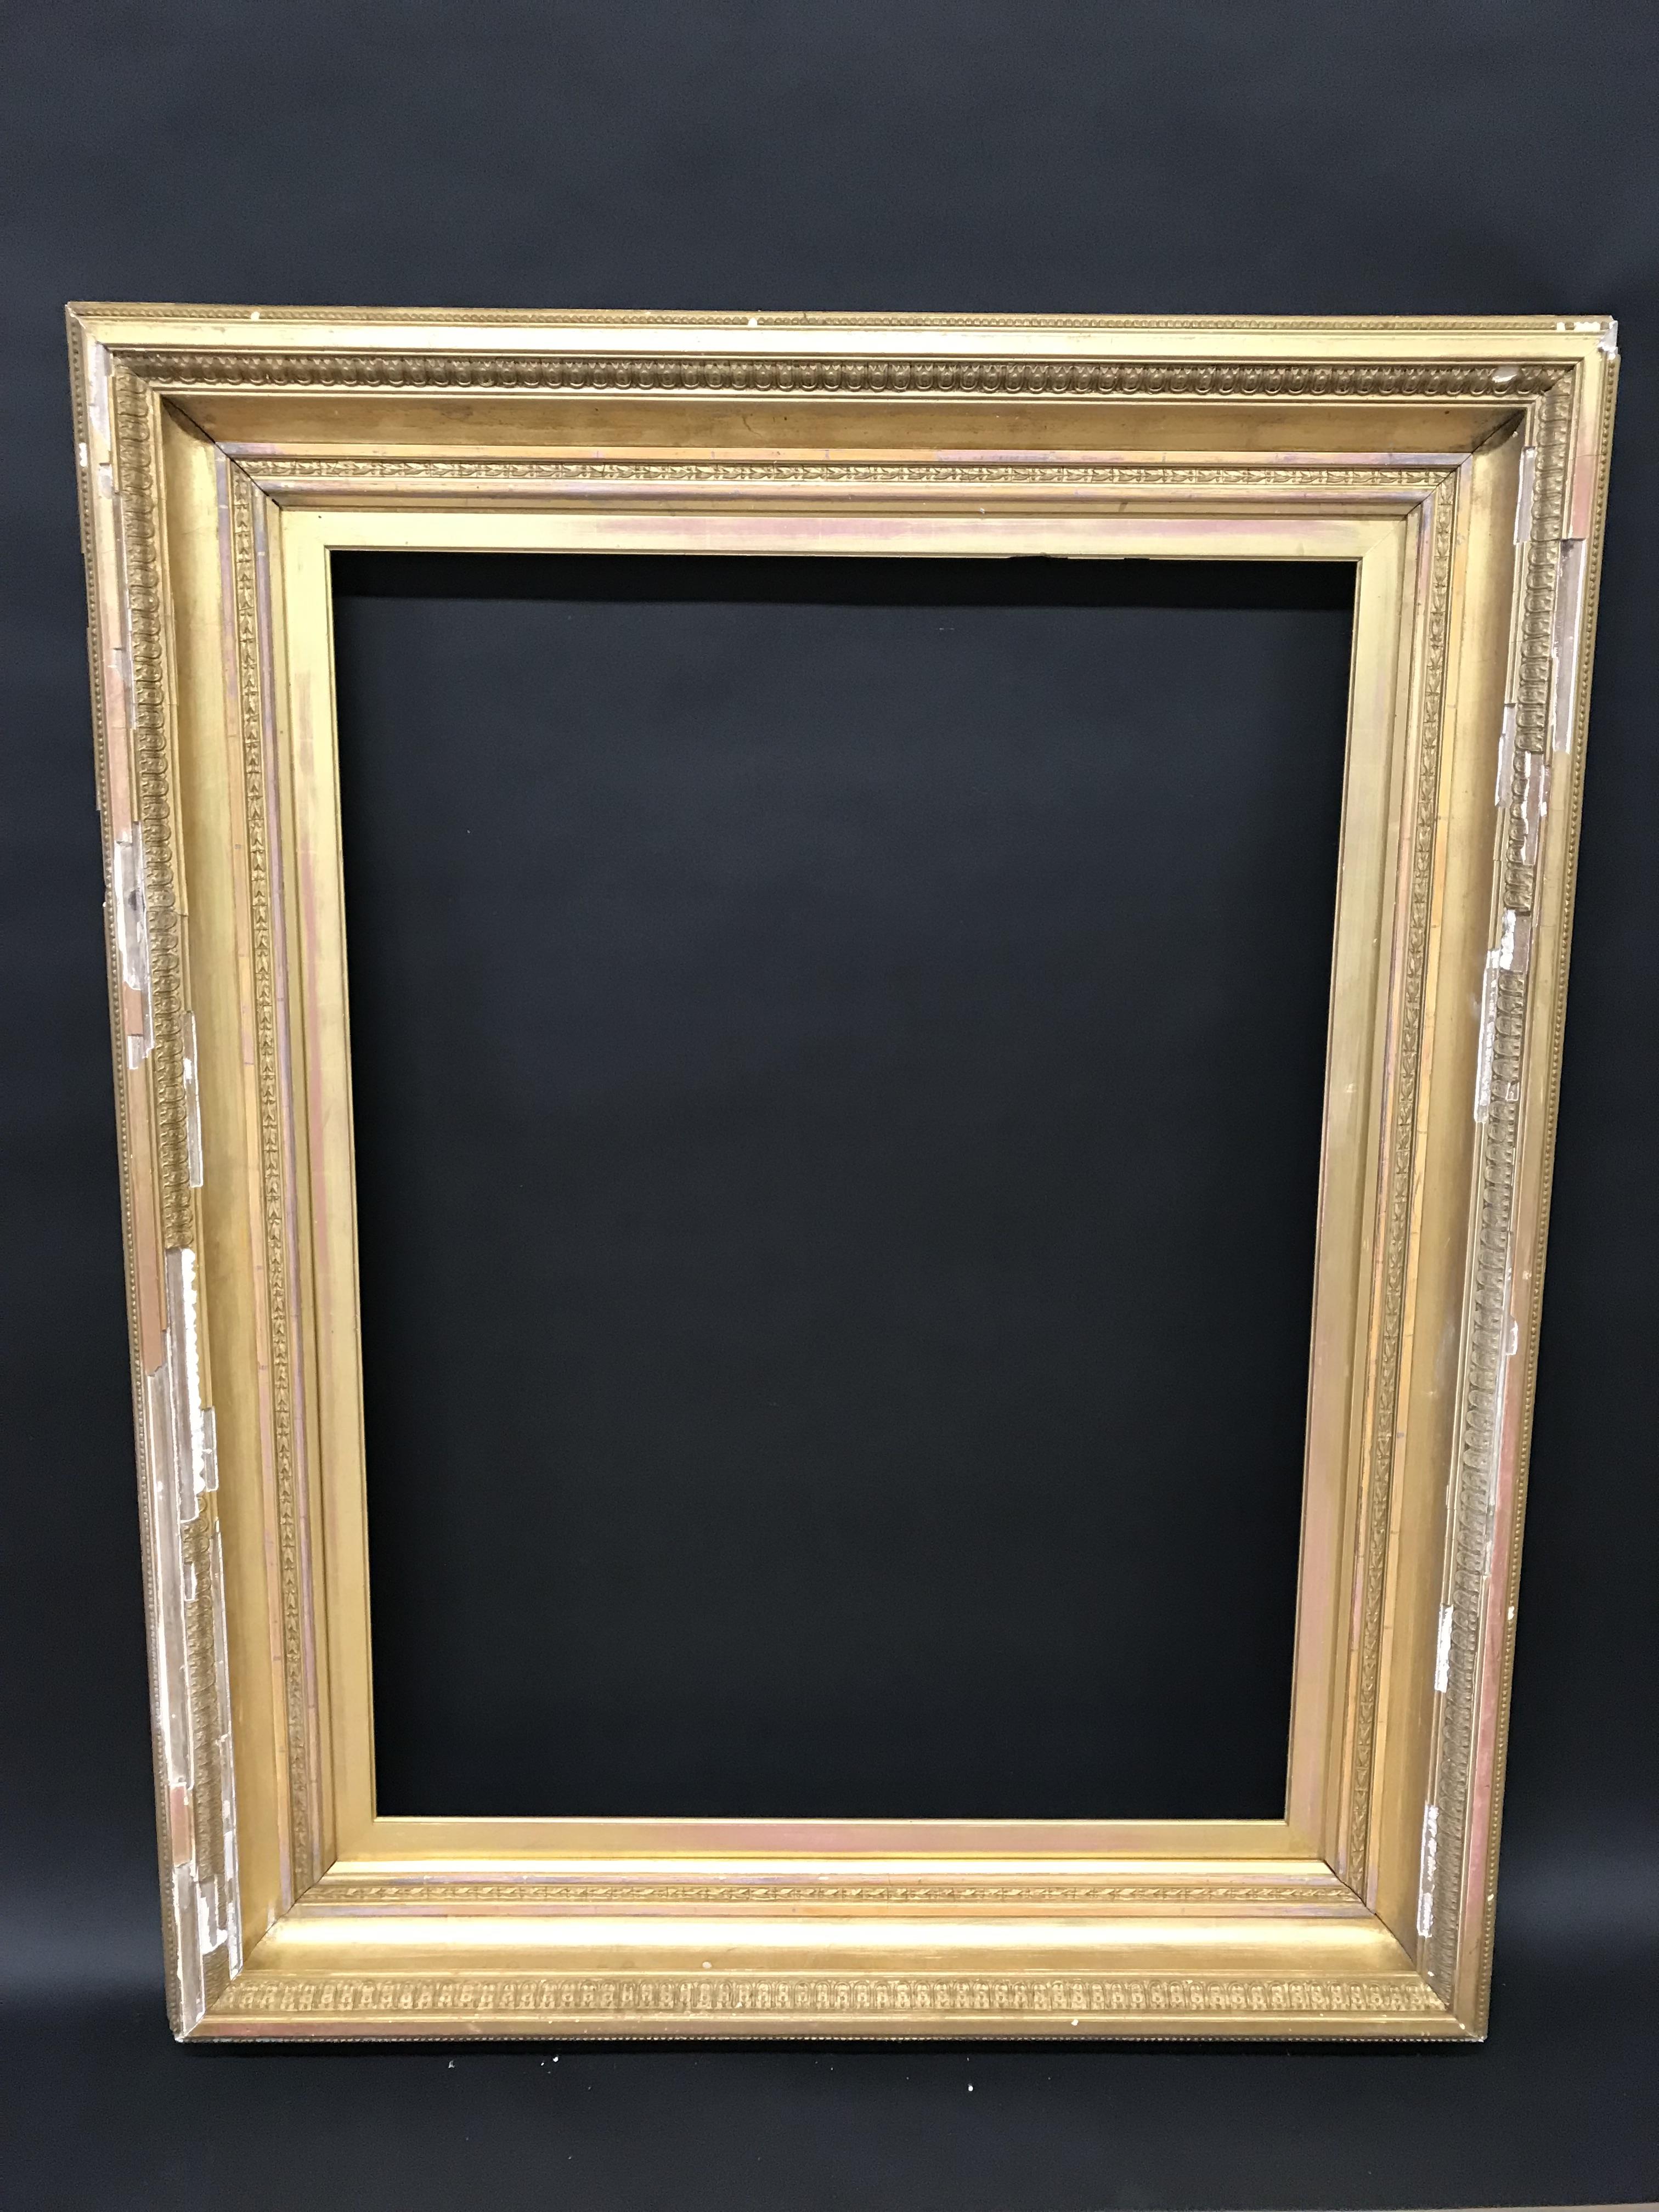 19th Century English School. A Gilt Composition Frame, 40" x 30" (rebate). - Image 2 of 3